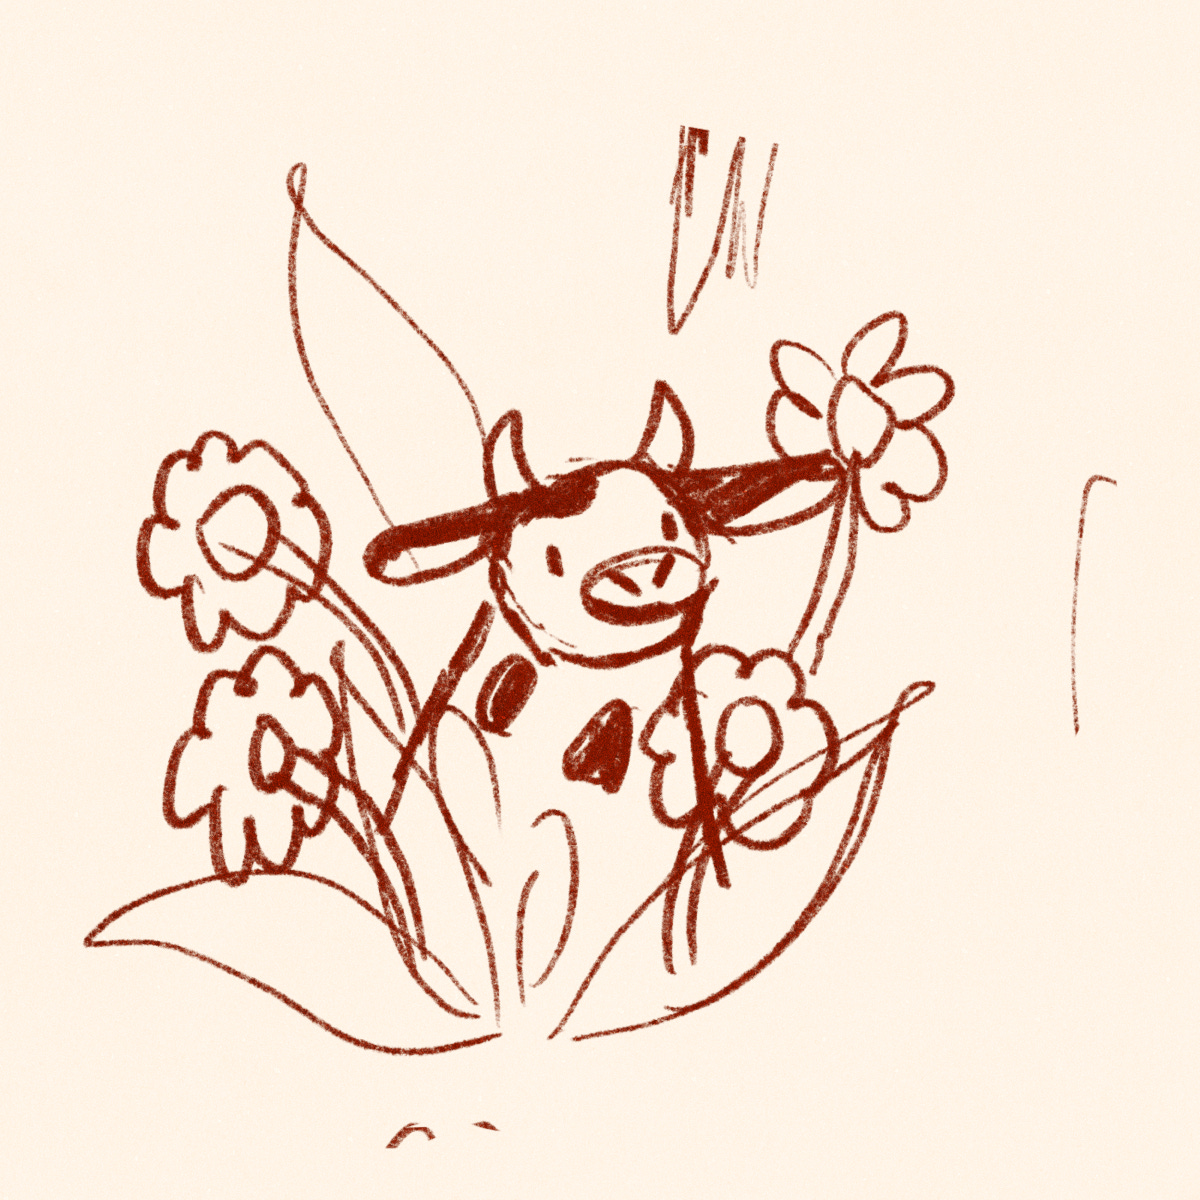 A digital sketch of a cow sitting among some flowers. The sketch is very loose and quick.